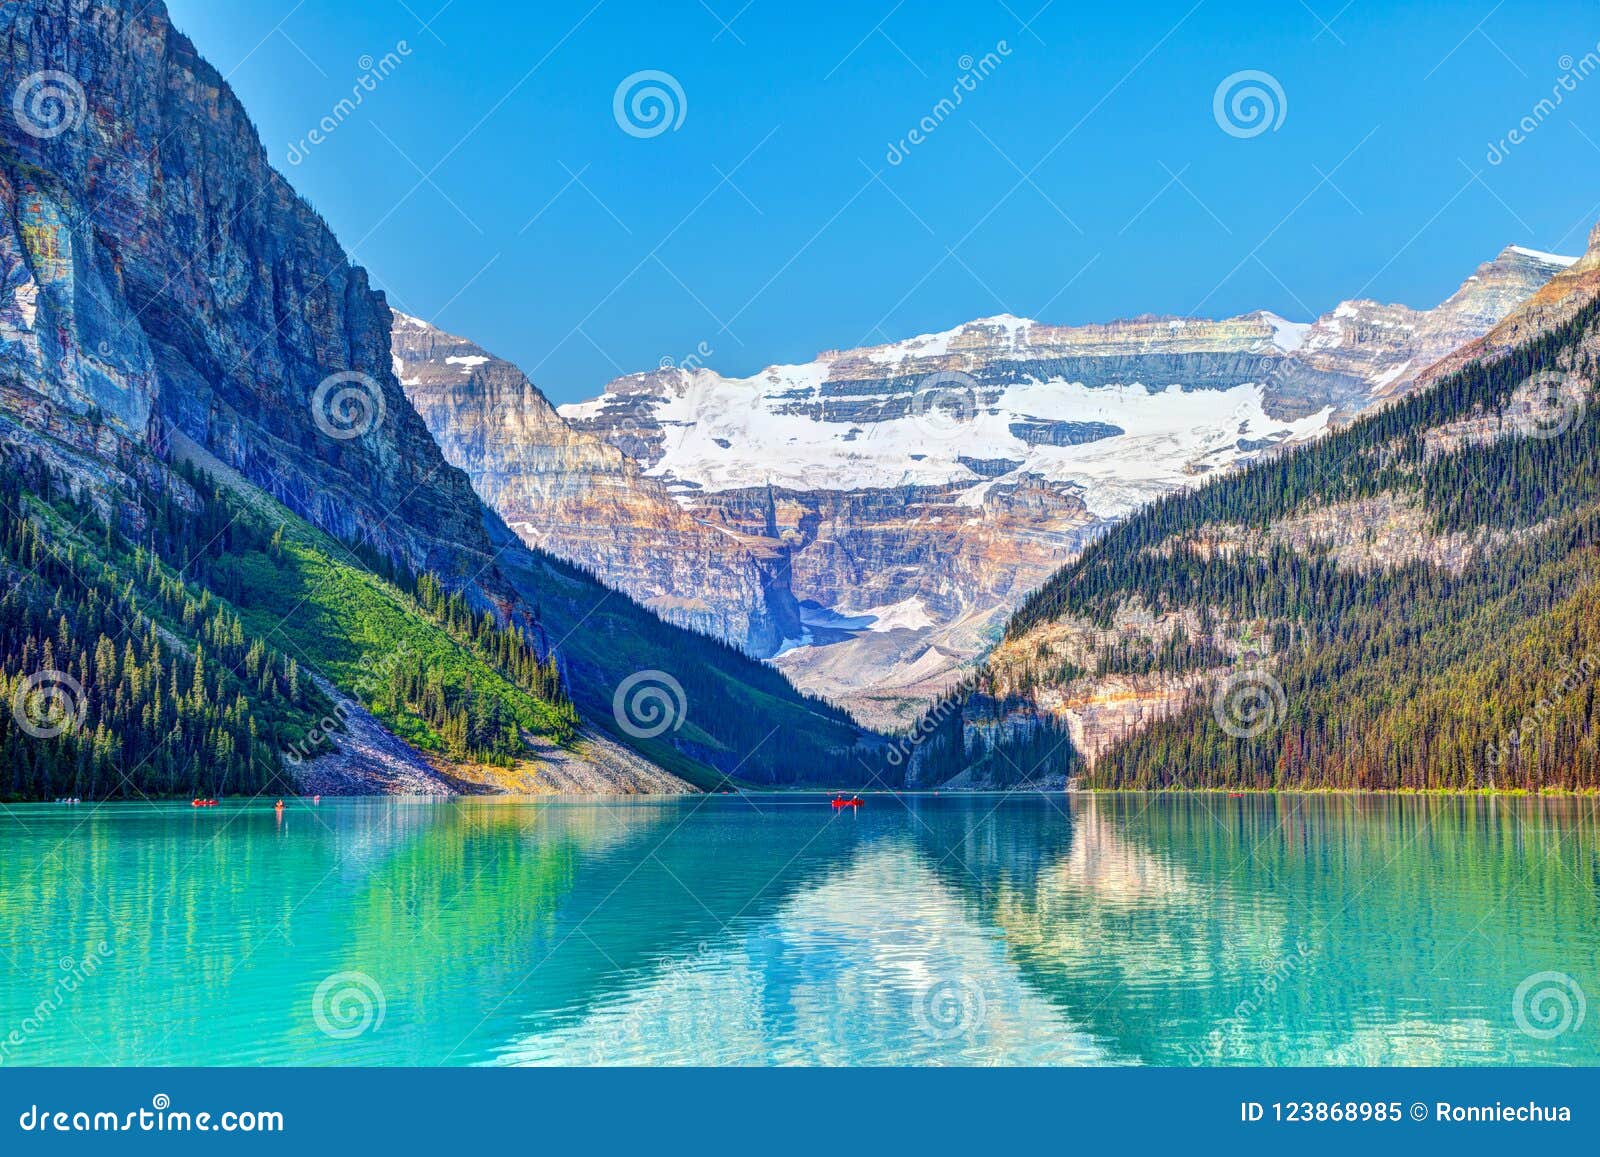 lake louise with mount victoria glacier in banff national park